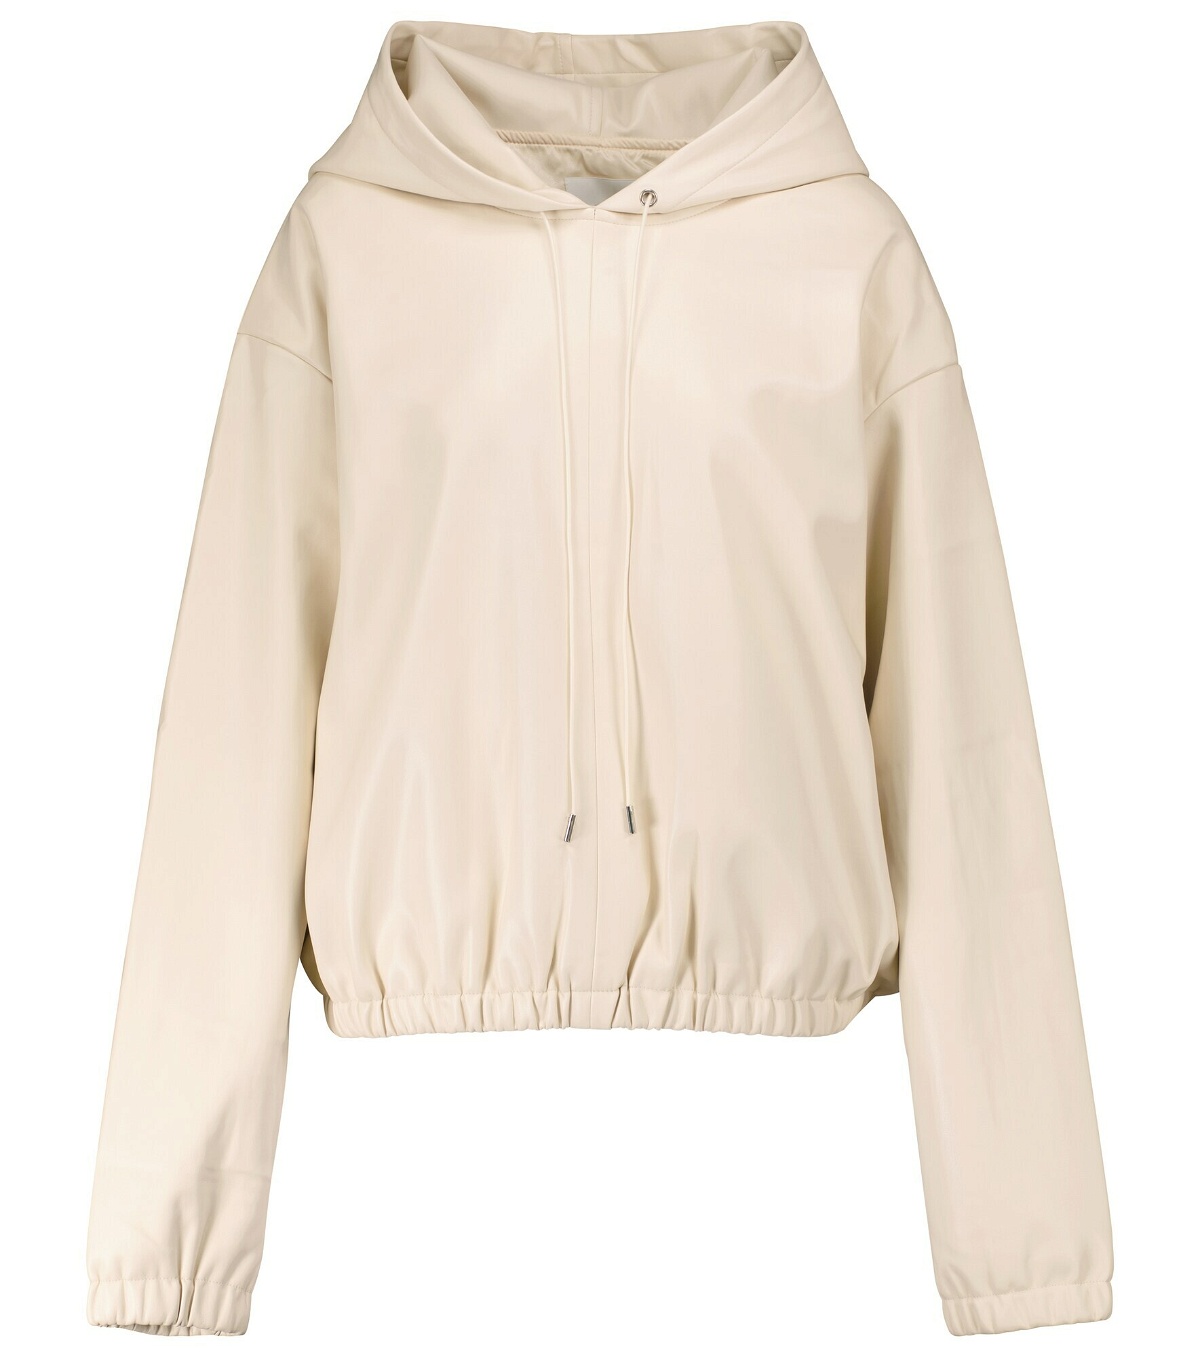 The Frankie Shop - Agata faux leather hoodie The Frankie Shop